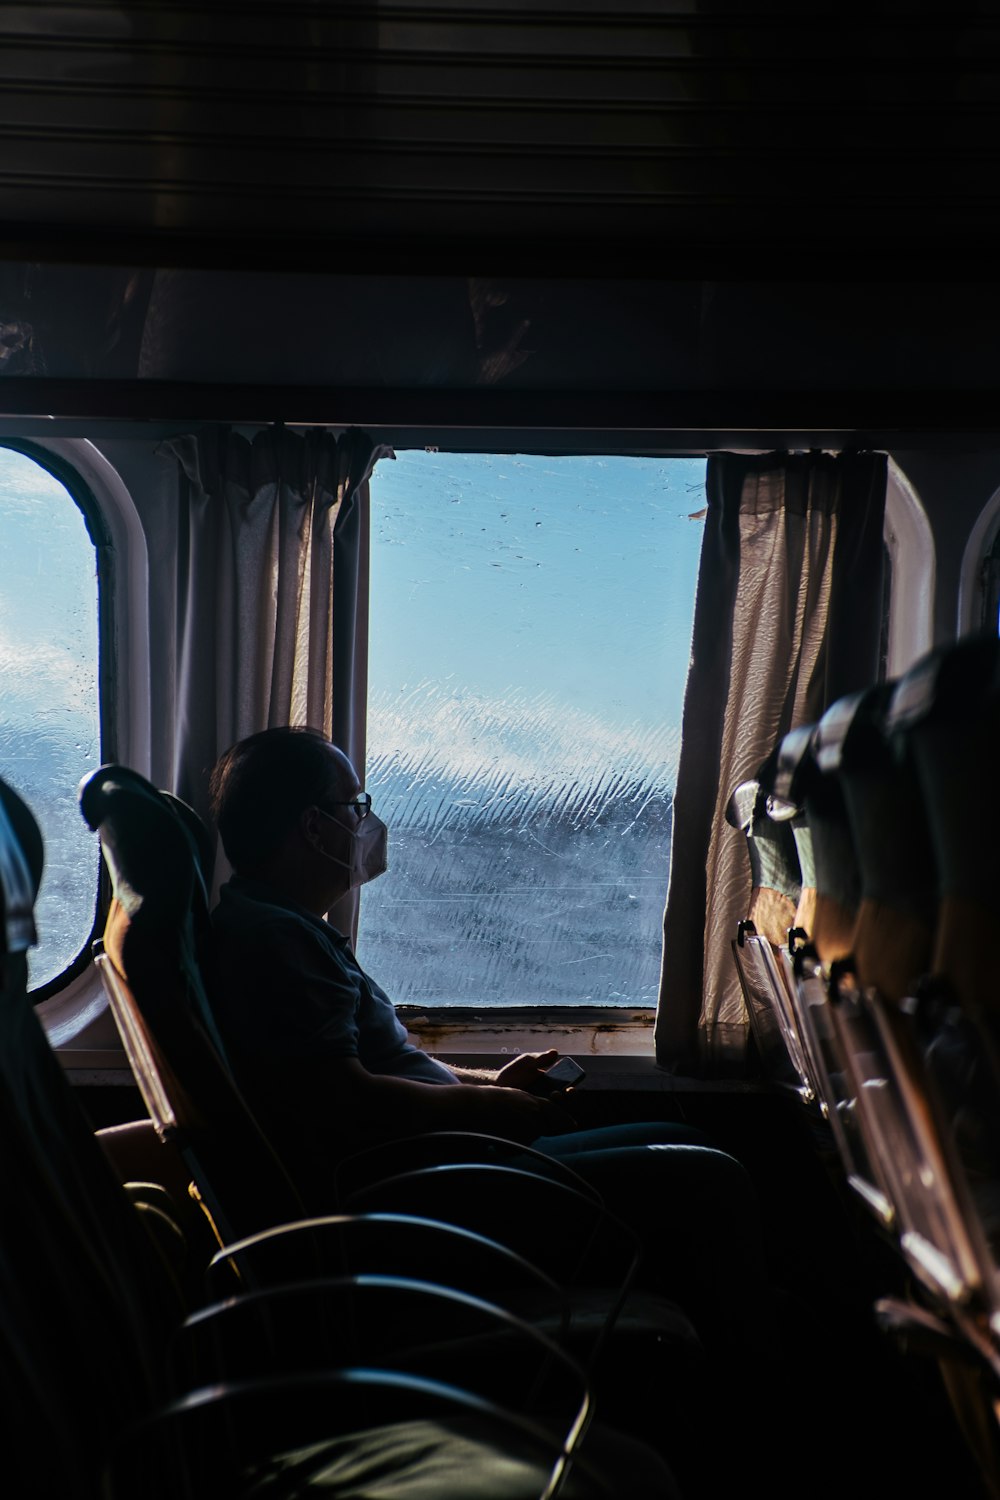 a man sitting on a train looking out the window